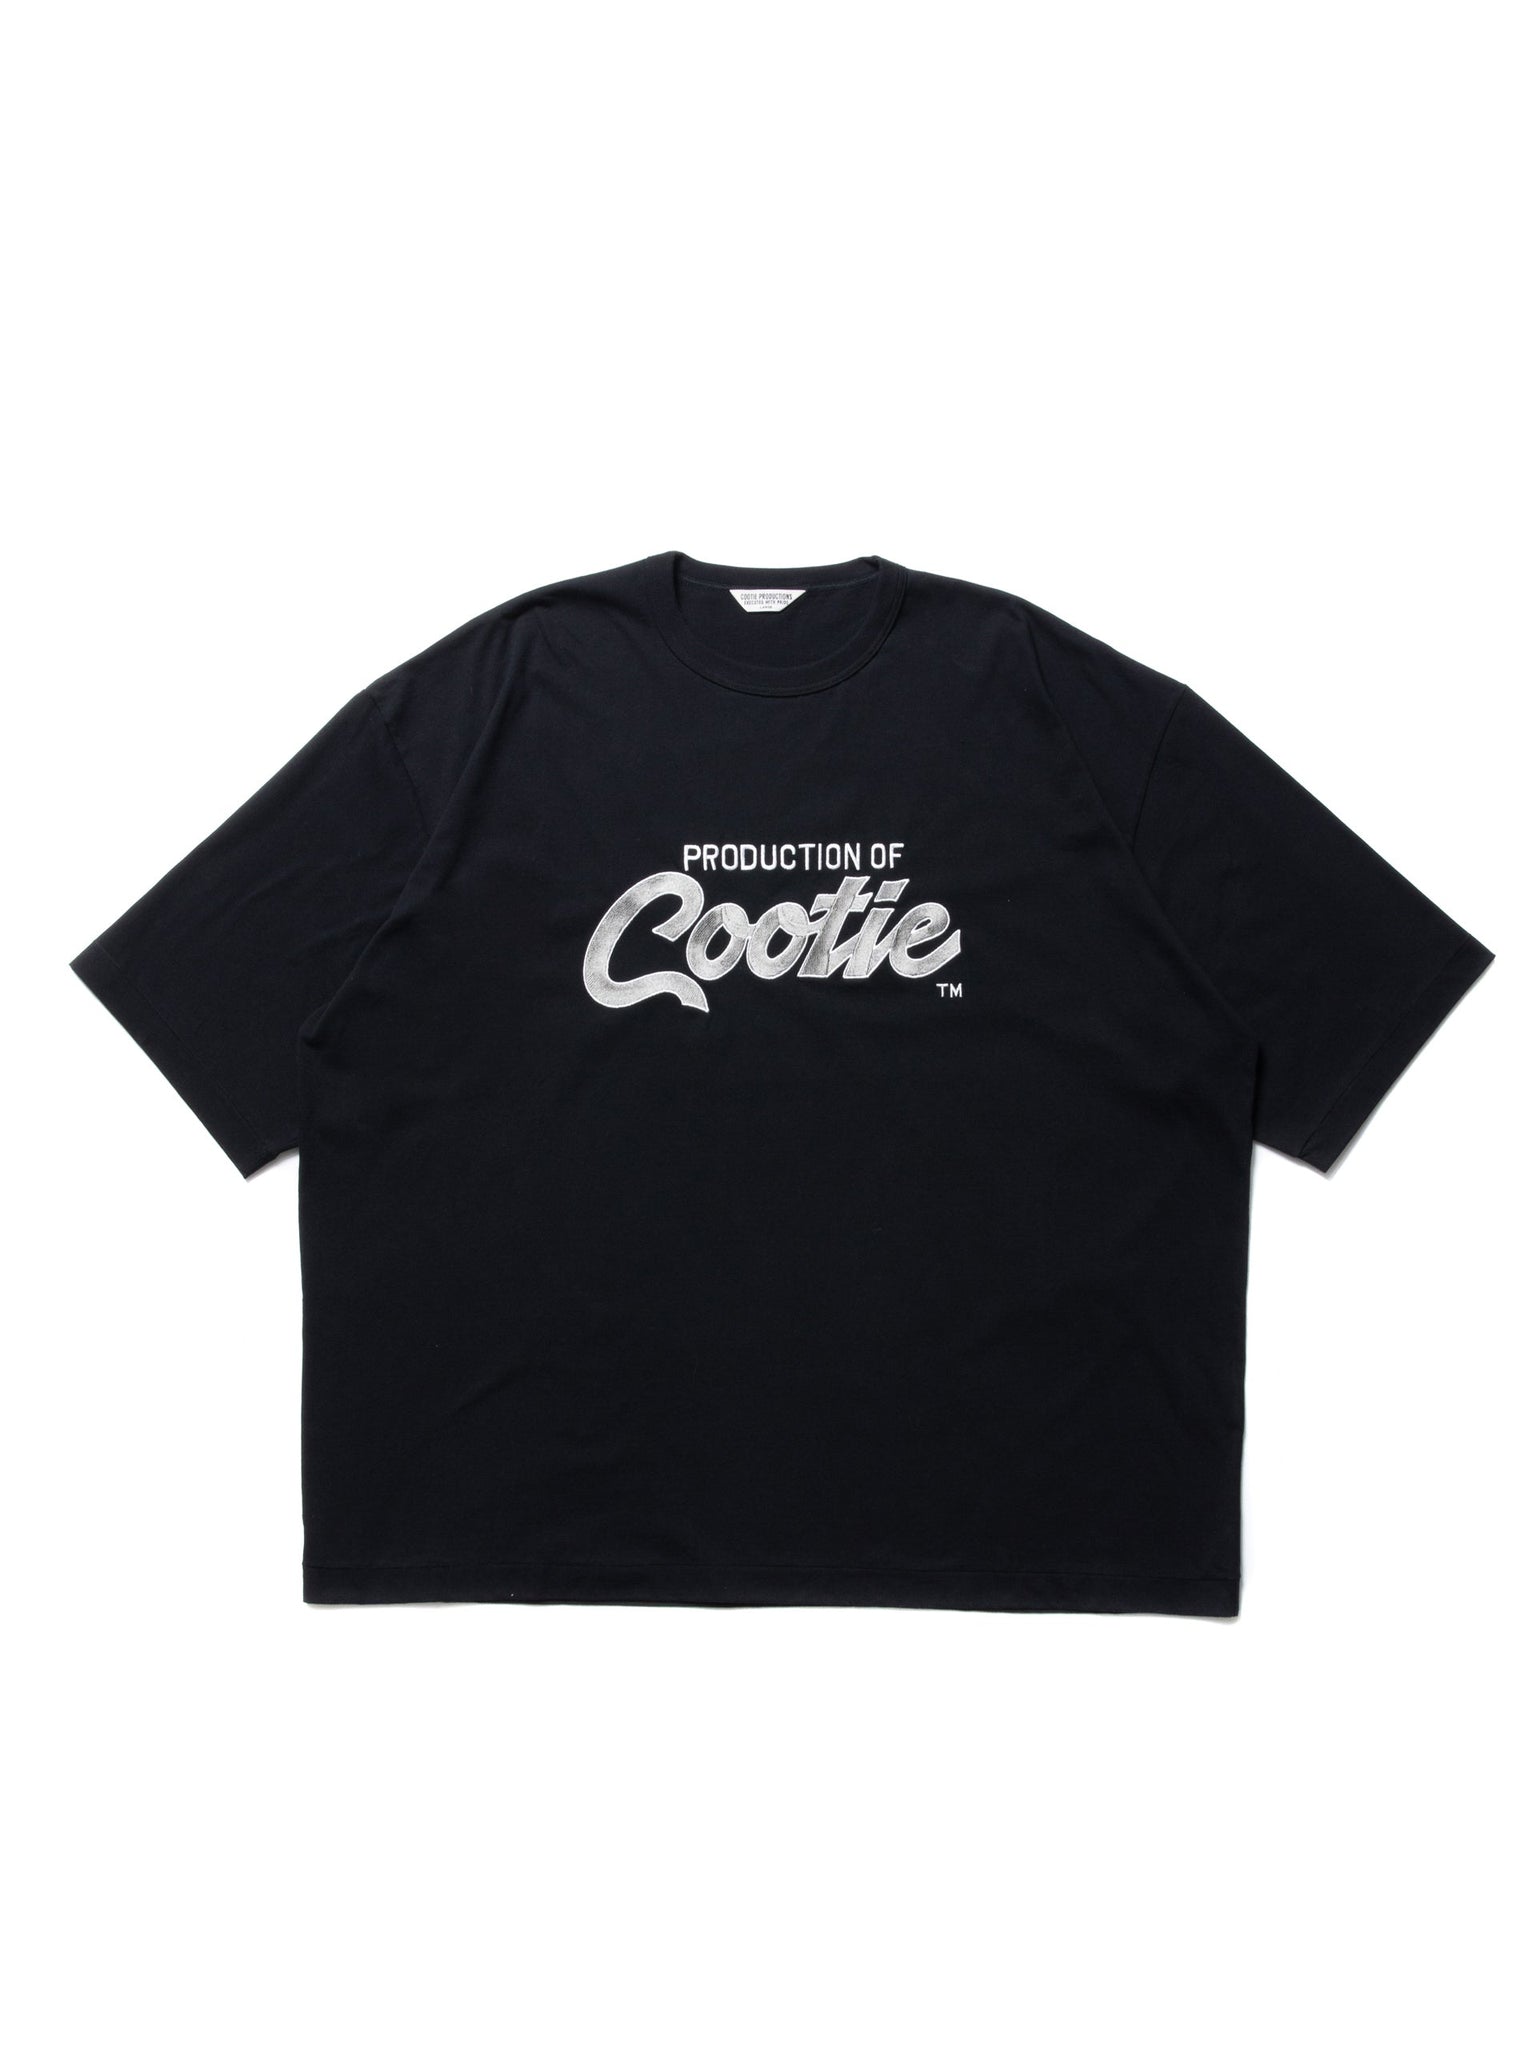 Embroidery Oversized S/S Tee (PRODUCTION OF COOTIE)